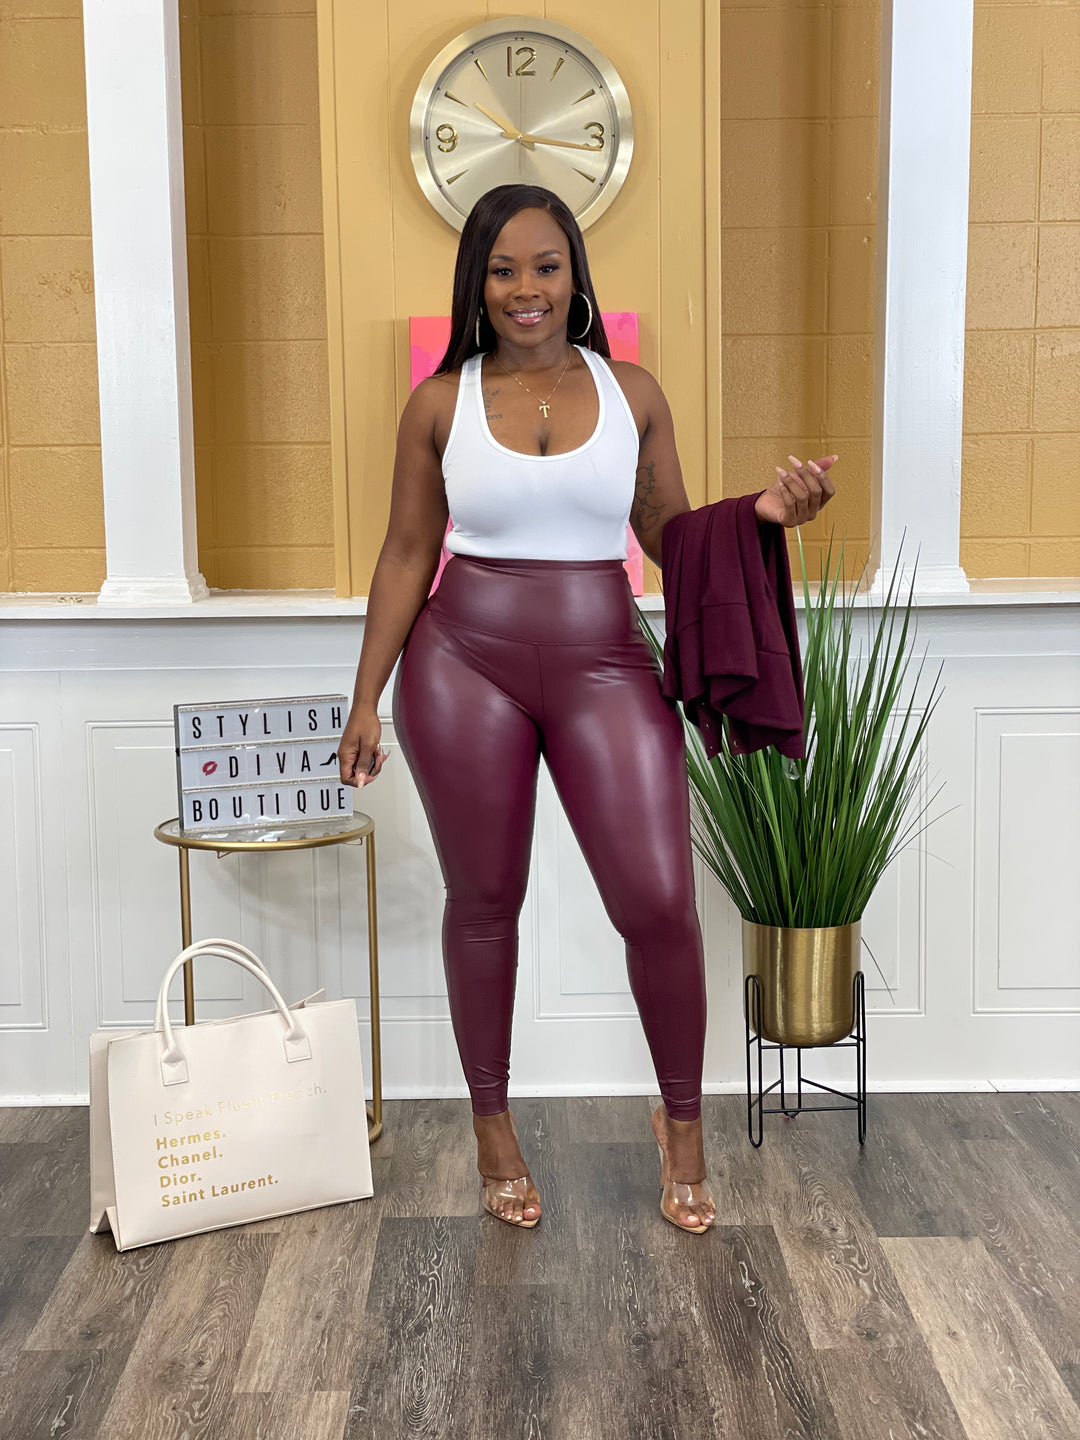 Cool Wholesale plus size leather leggings In Any Size And Style